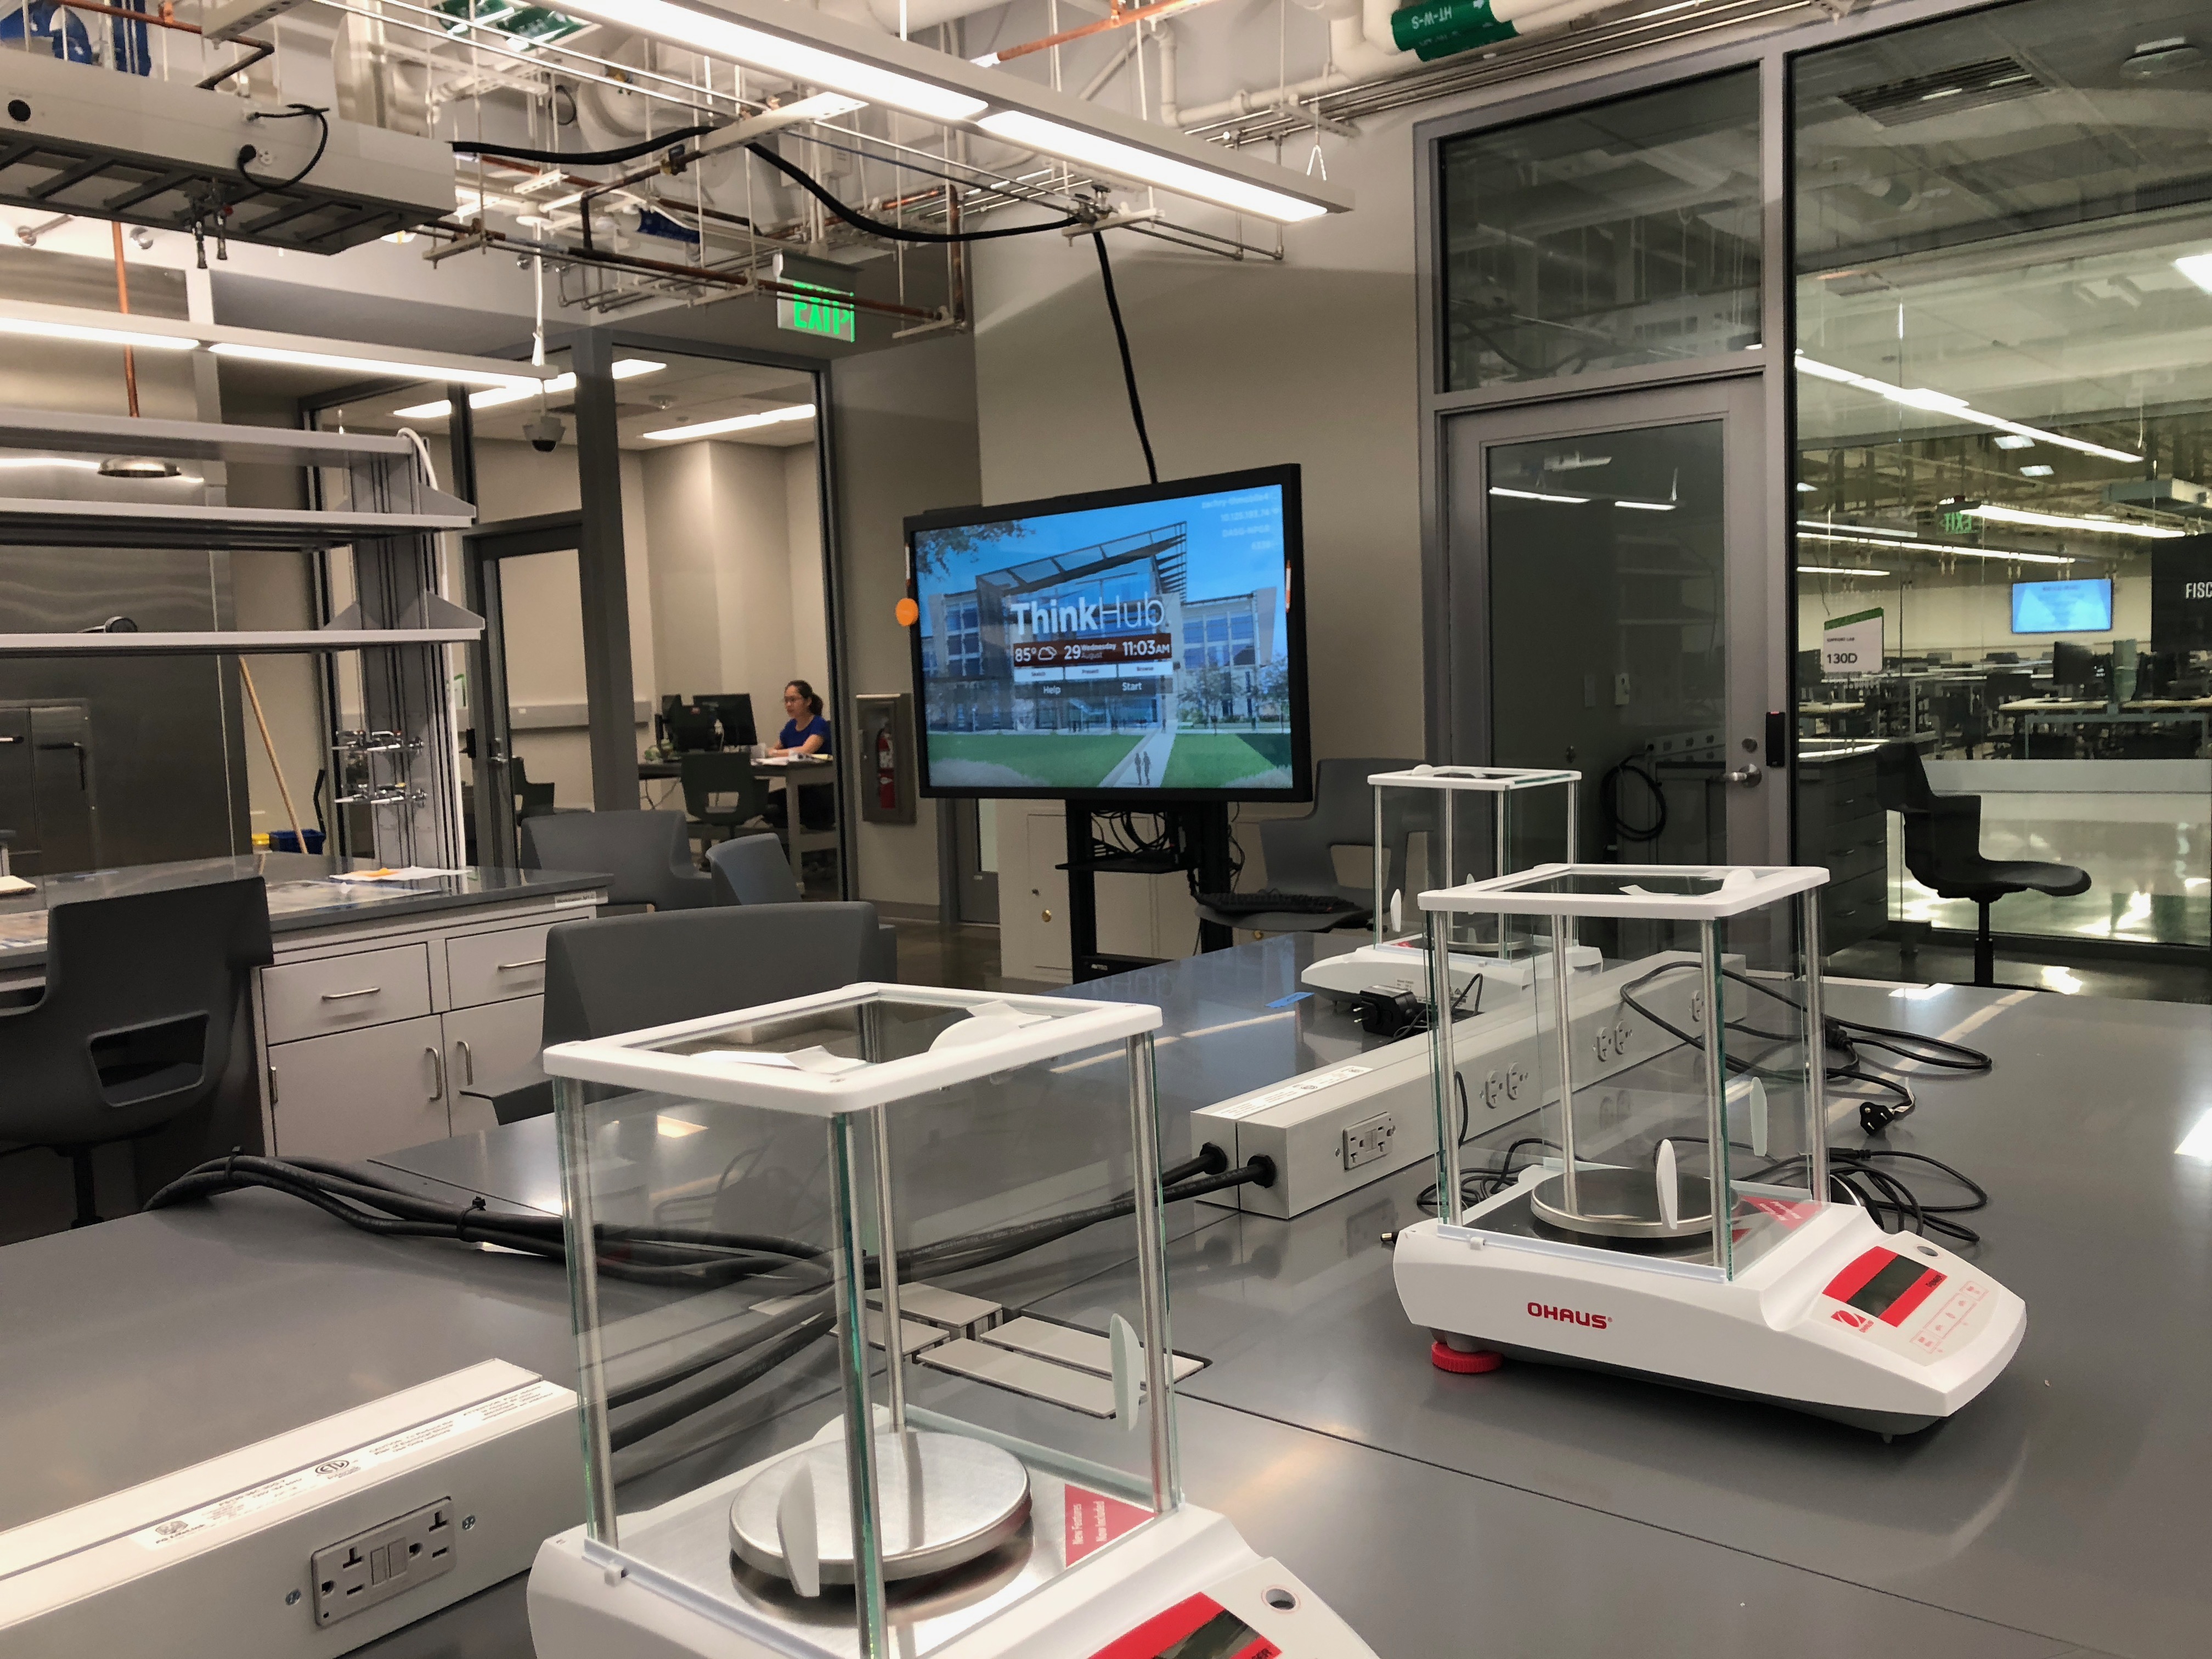 install-Mobile-Carts-of-Interactive-Displays-university-lab